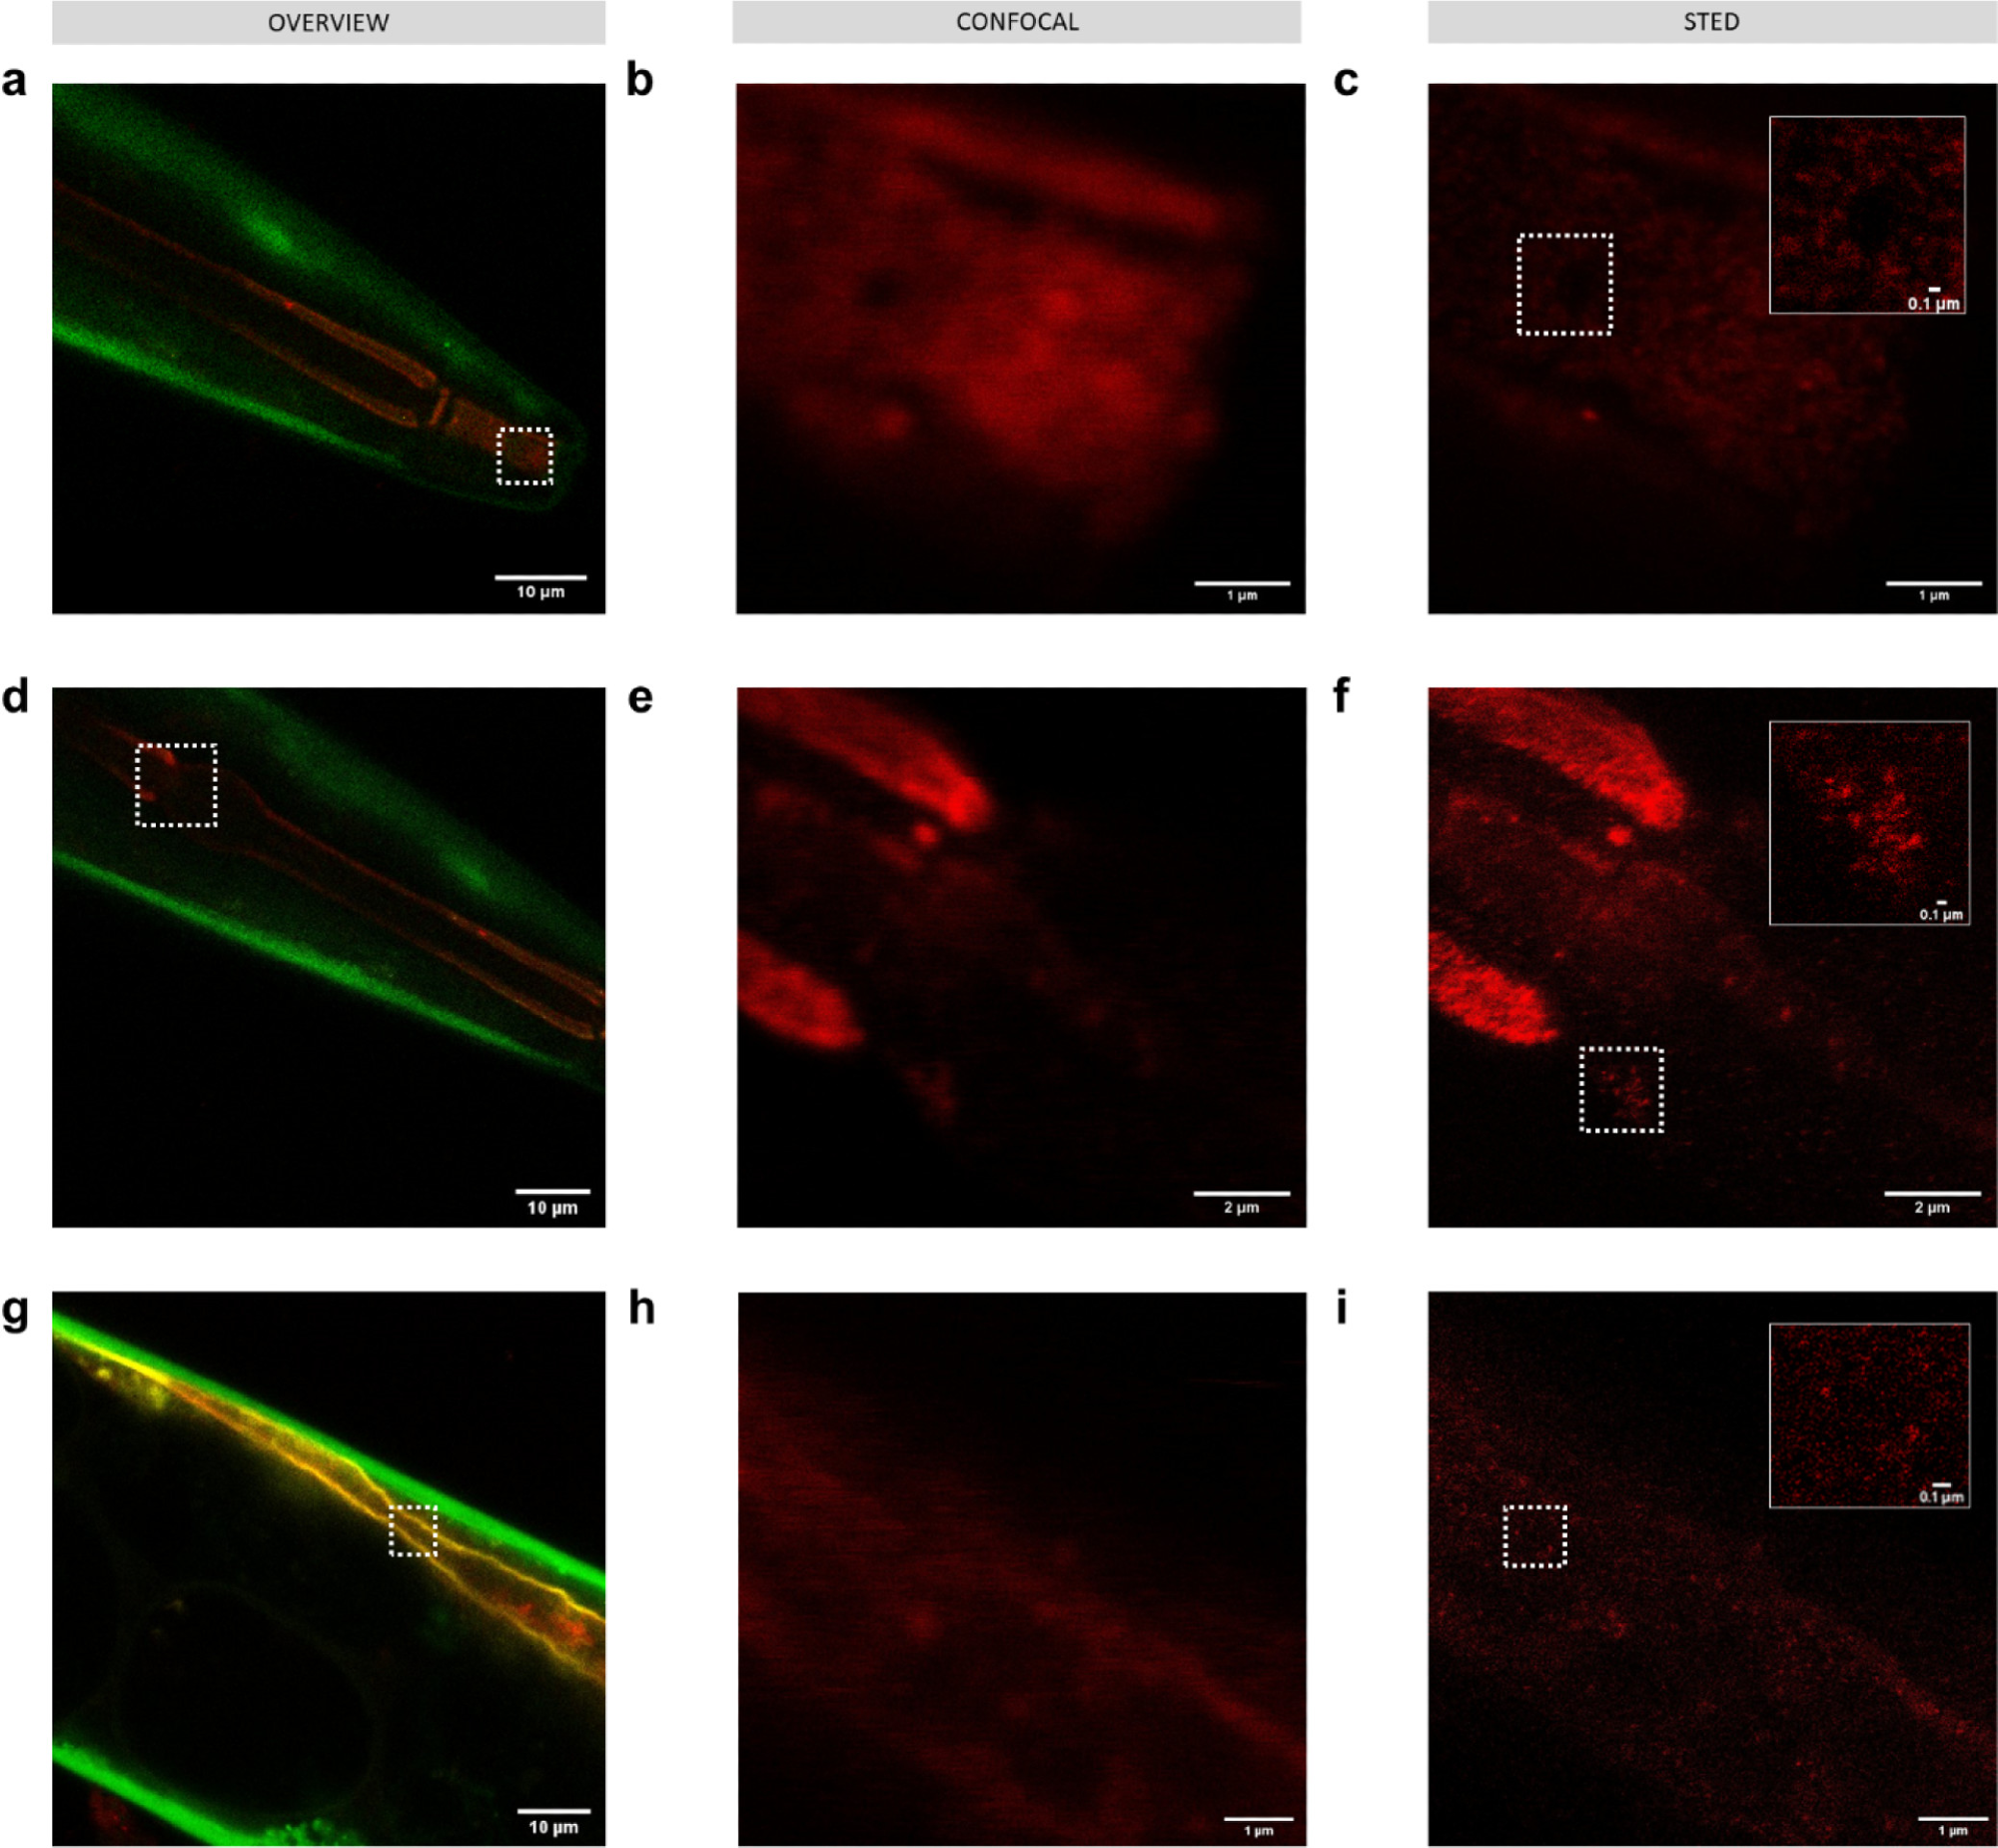 Imaging 50 nm polystyrene nanoplastics passively labeled with Atto 647N (red) in C. elegans KWN117 adult expressing GFP (green) in the body wall and mCherry (yellow) in the apical intestinal membrane. Confocal overview and high resolution of confocal and STED images of the scanned area indicated by white boxes for parts of the digestive track in the mouth (a–c), pharynx (d–f), and intestine (g–i). Insets in STED images correspond to the areas indicated by white boxes.